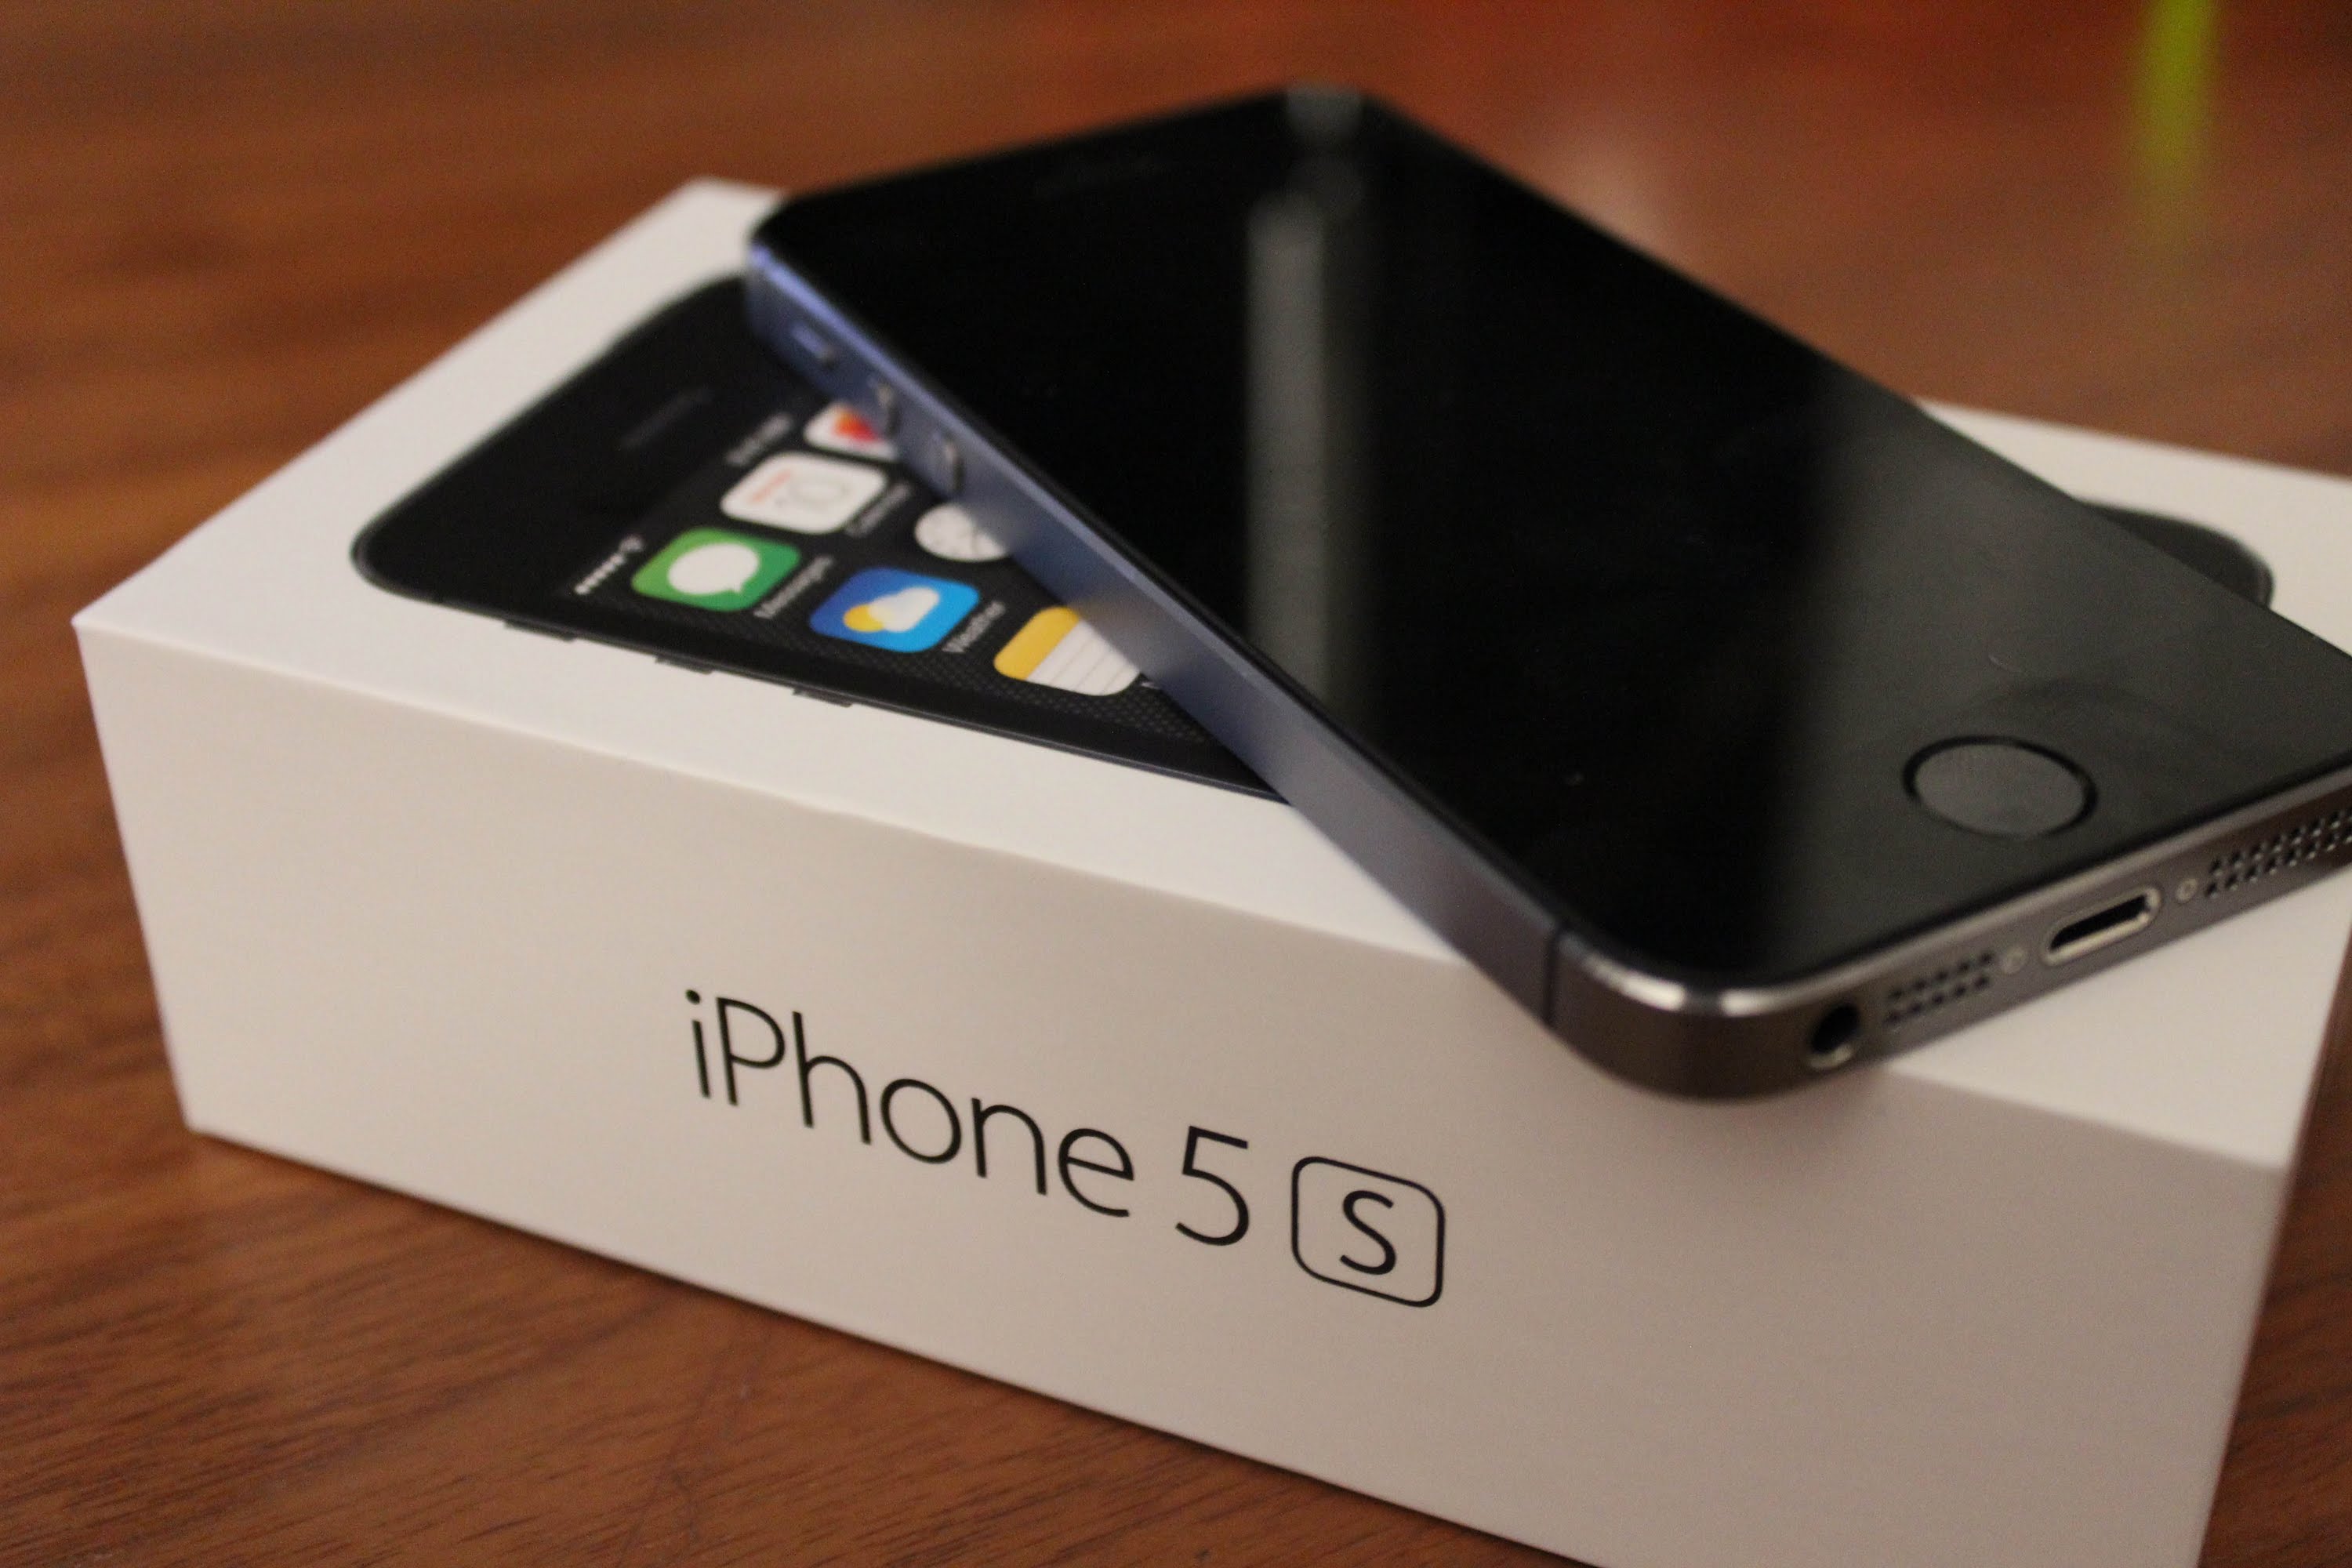 Apple iPhone 5s Gadget Review